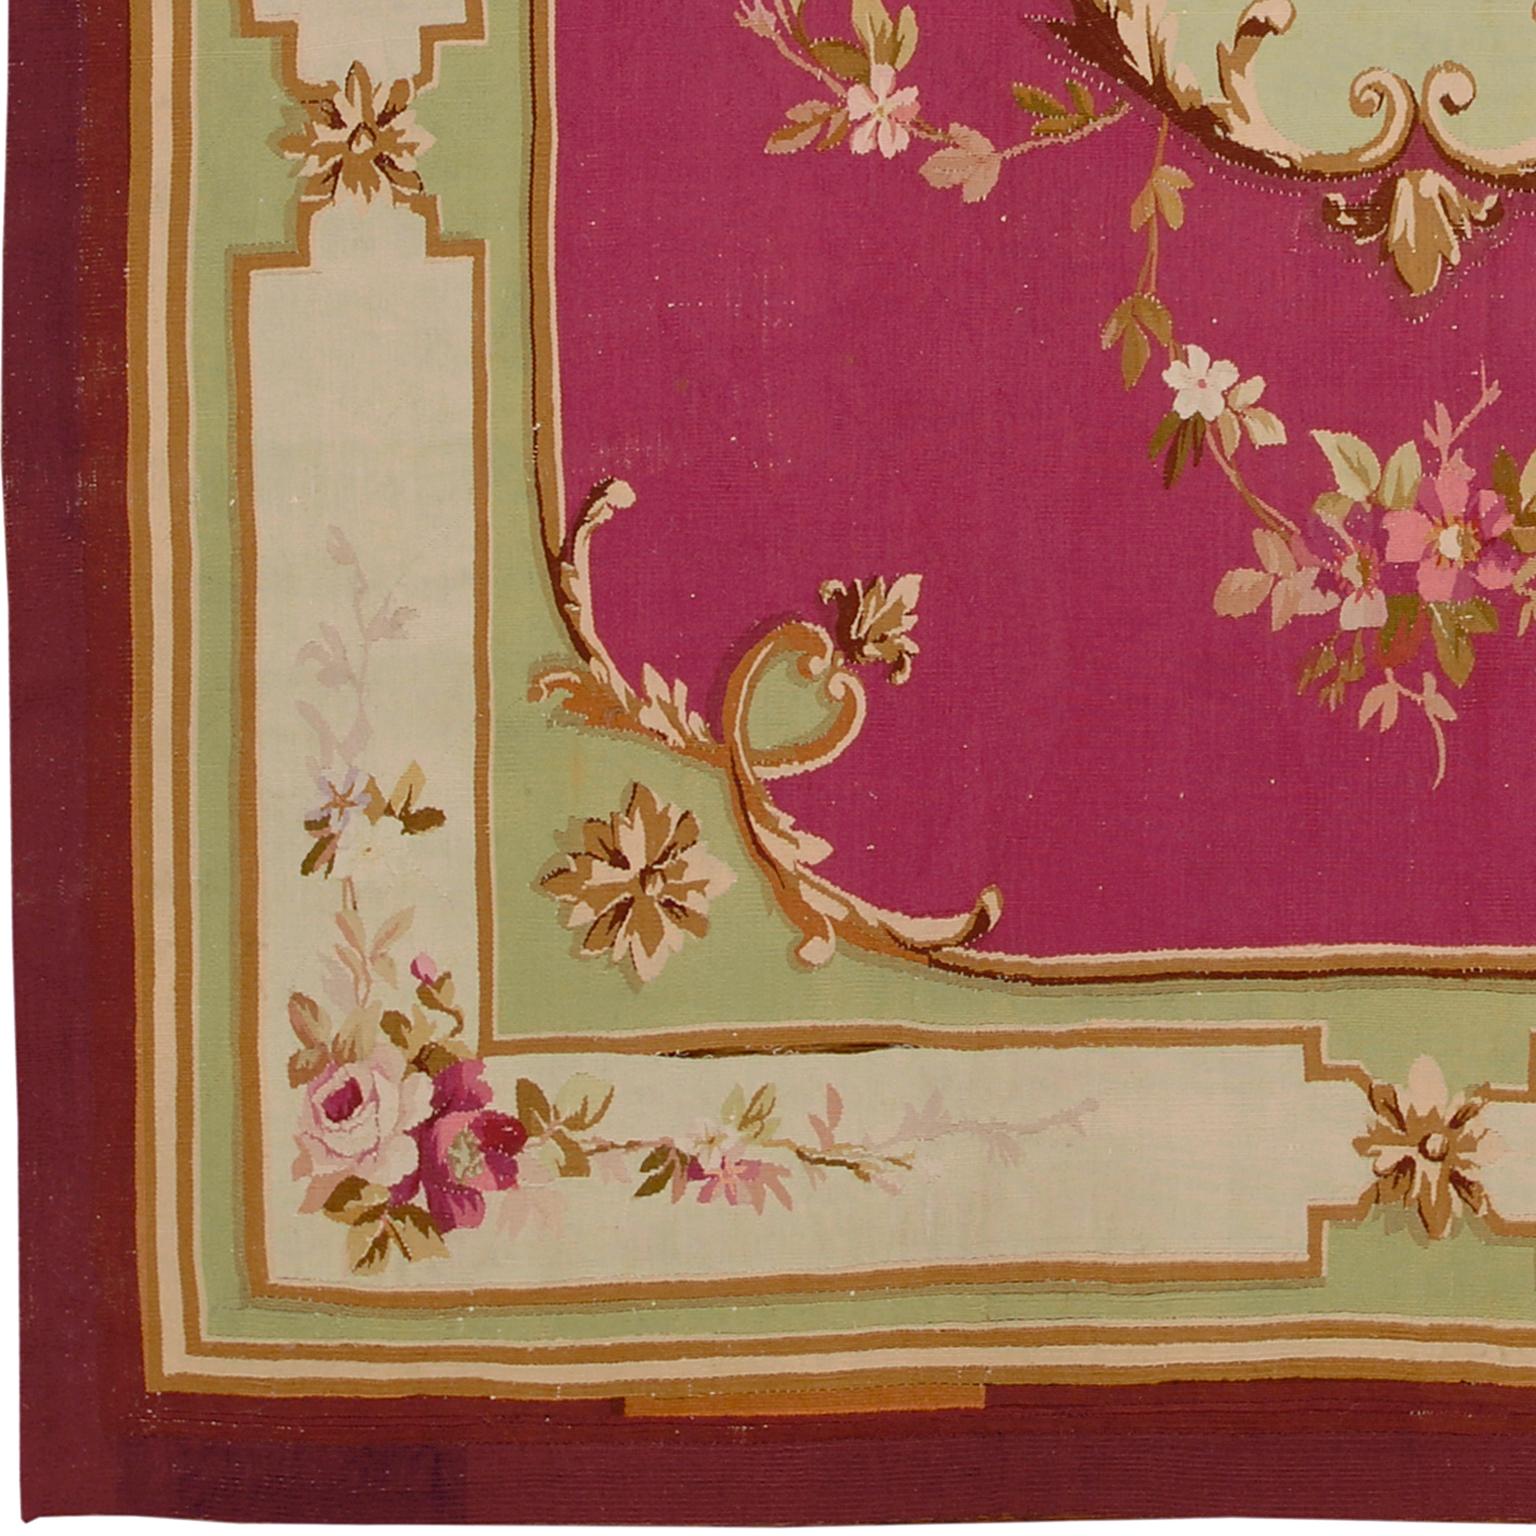 Antique French Aubusson rug
France, circa 1880
Handwoven.